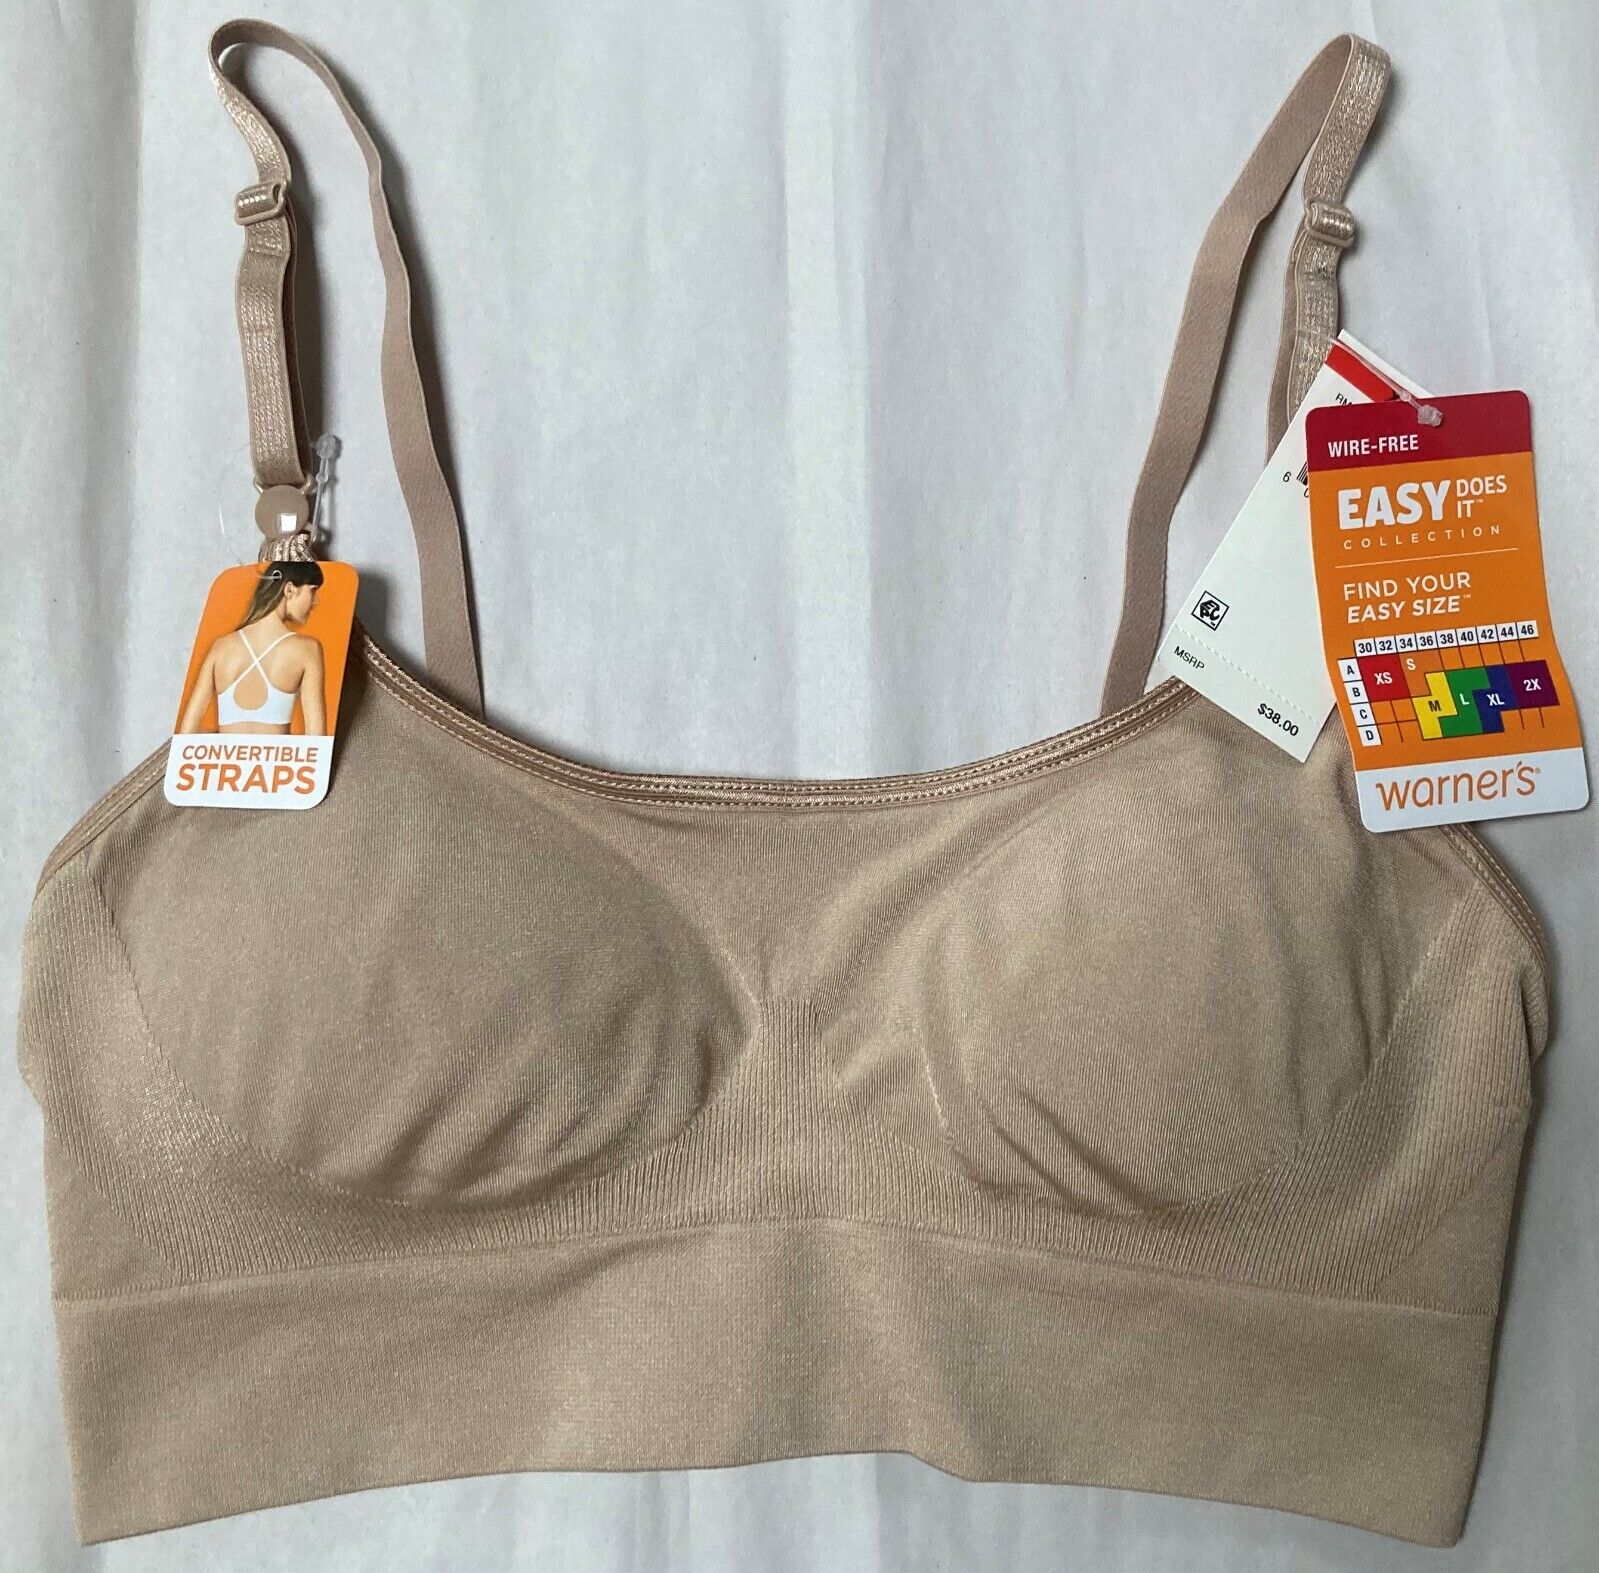 NWT WARNER'S EASY DOES IT W/F NUDE CONVERTIBLE STRAPS BRA RM0911A XSMALL  $38